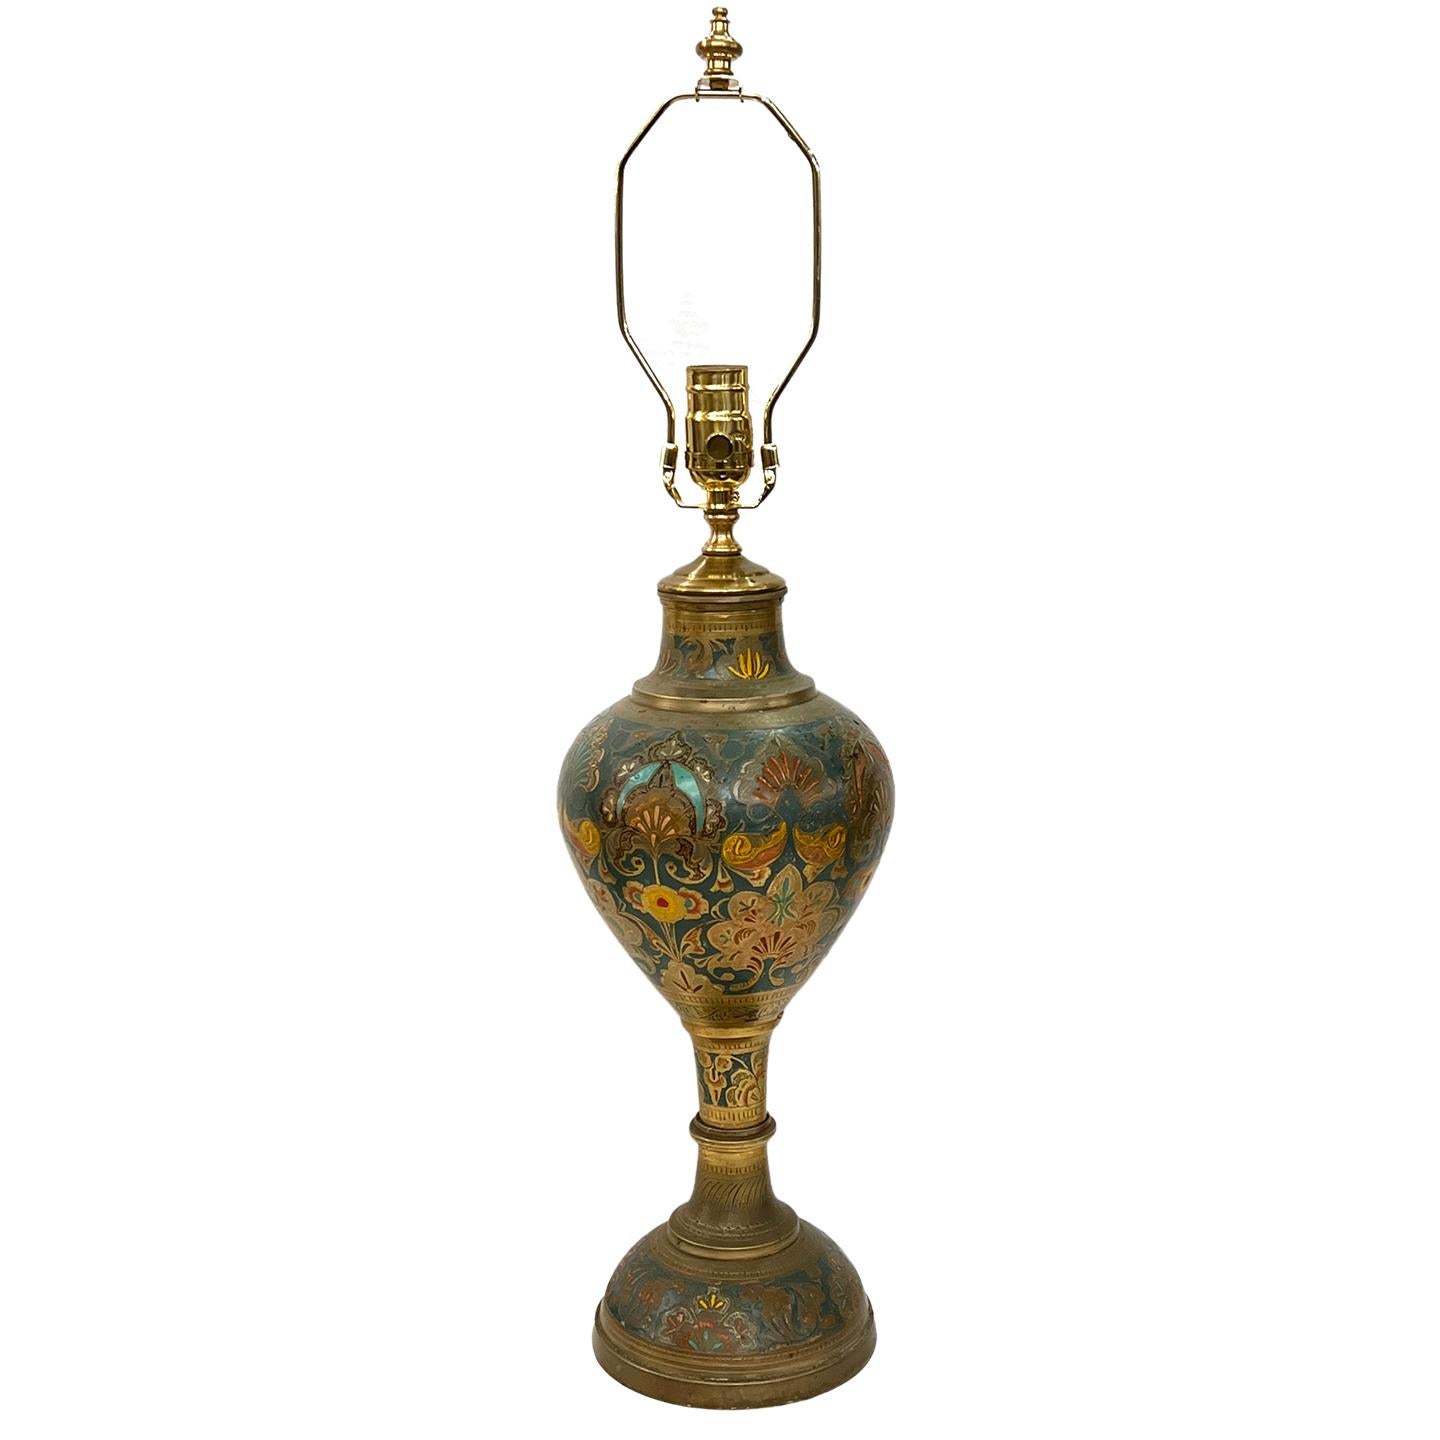 A circa 1920s etched and polychromed middle eastern metal table lamp.

Measurements:
Height of body: 17